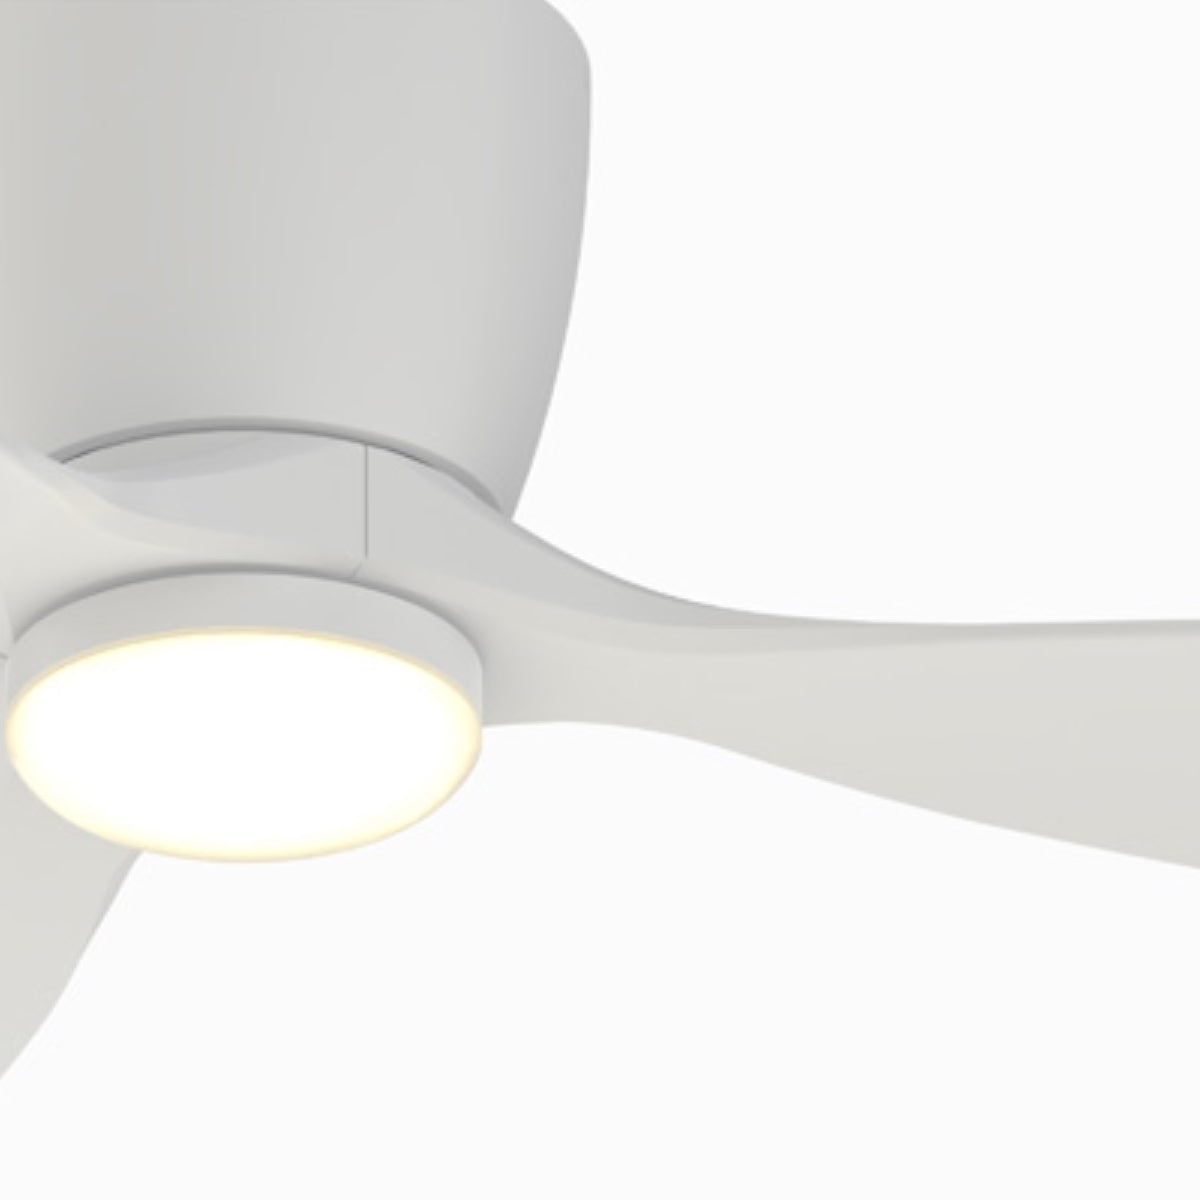 Klinch 44 Inch Low Profile Outdoor Ceiling Fan With Light and Remote